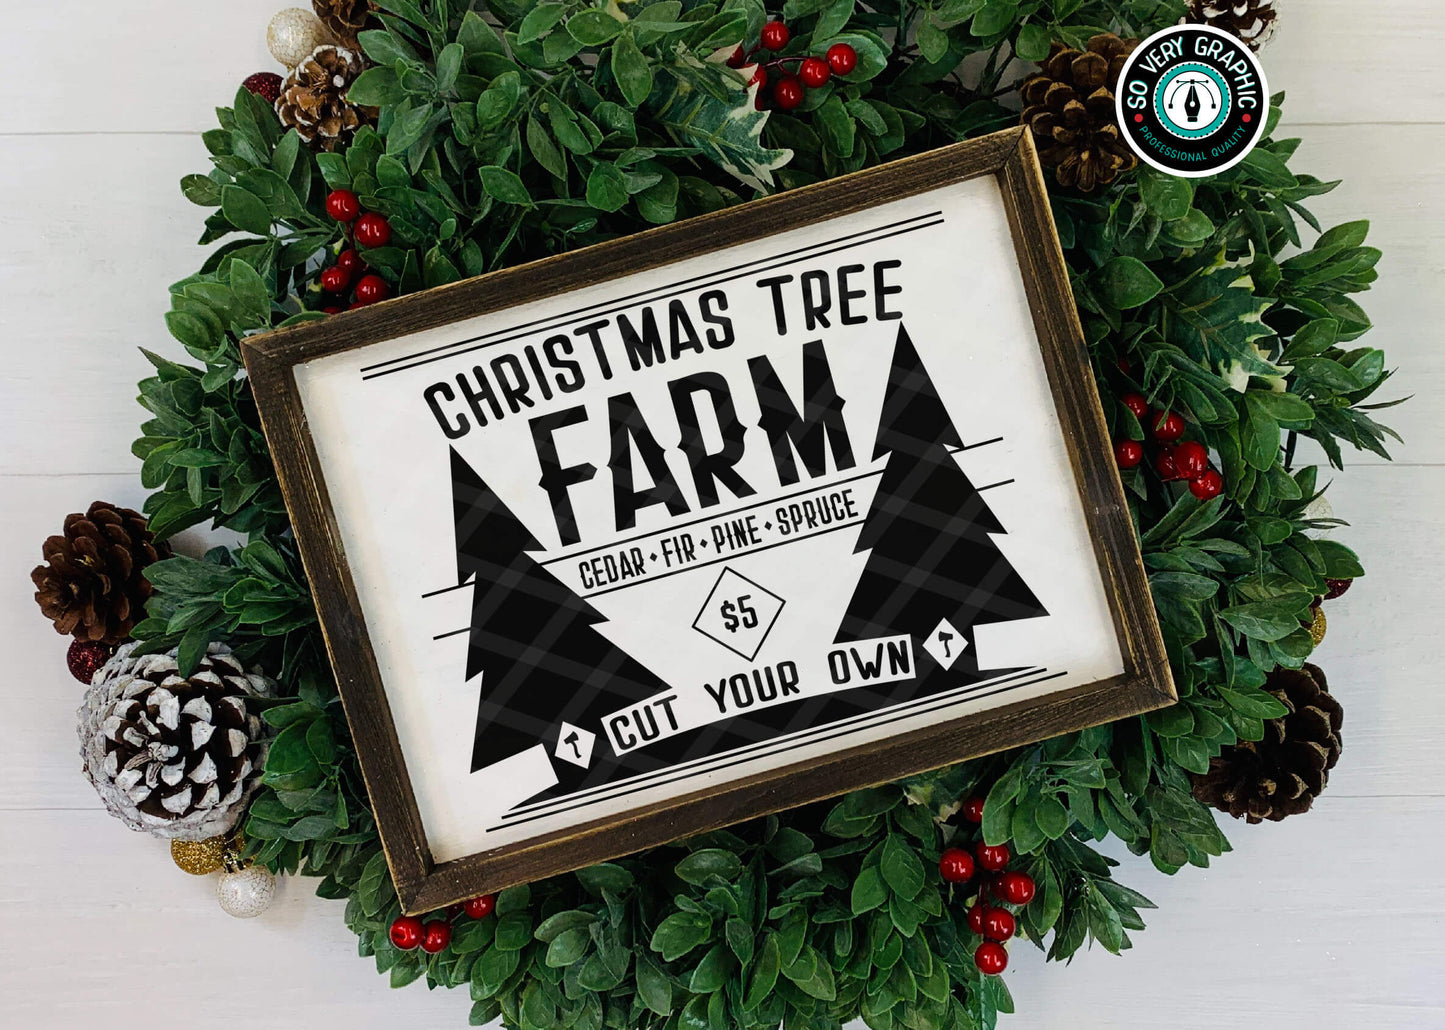 Christmas Tree Farm SVG Cut File displayed in a rustic wood frame on top of winter greenery, holly and pinecones